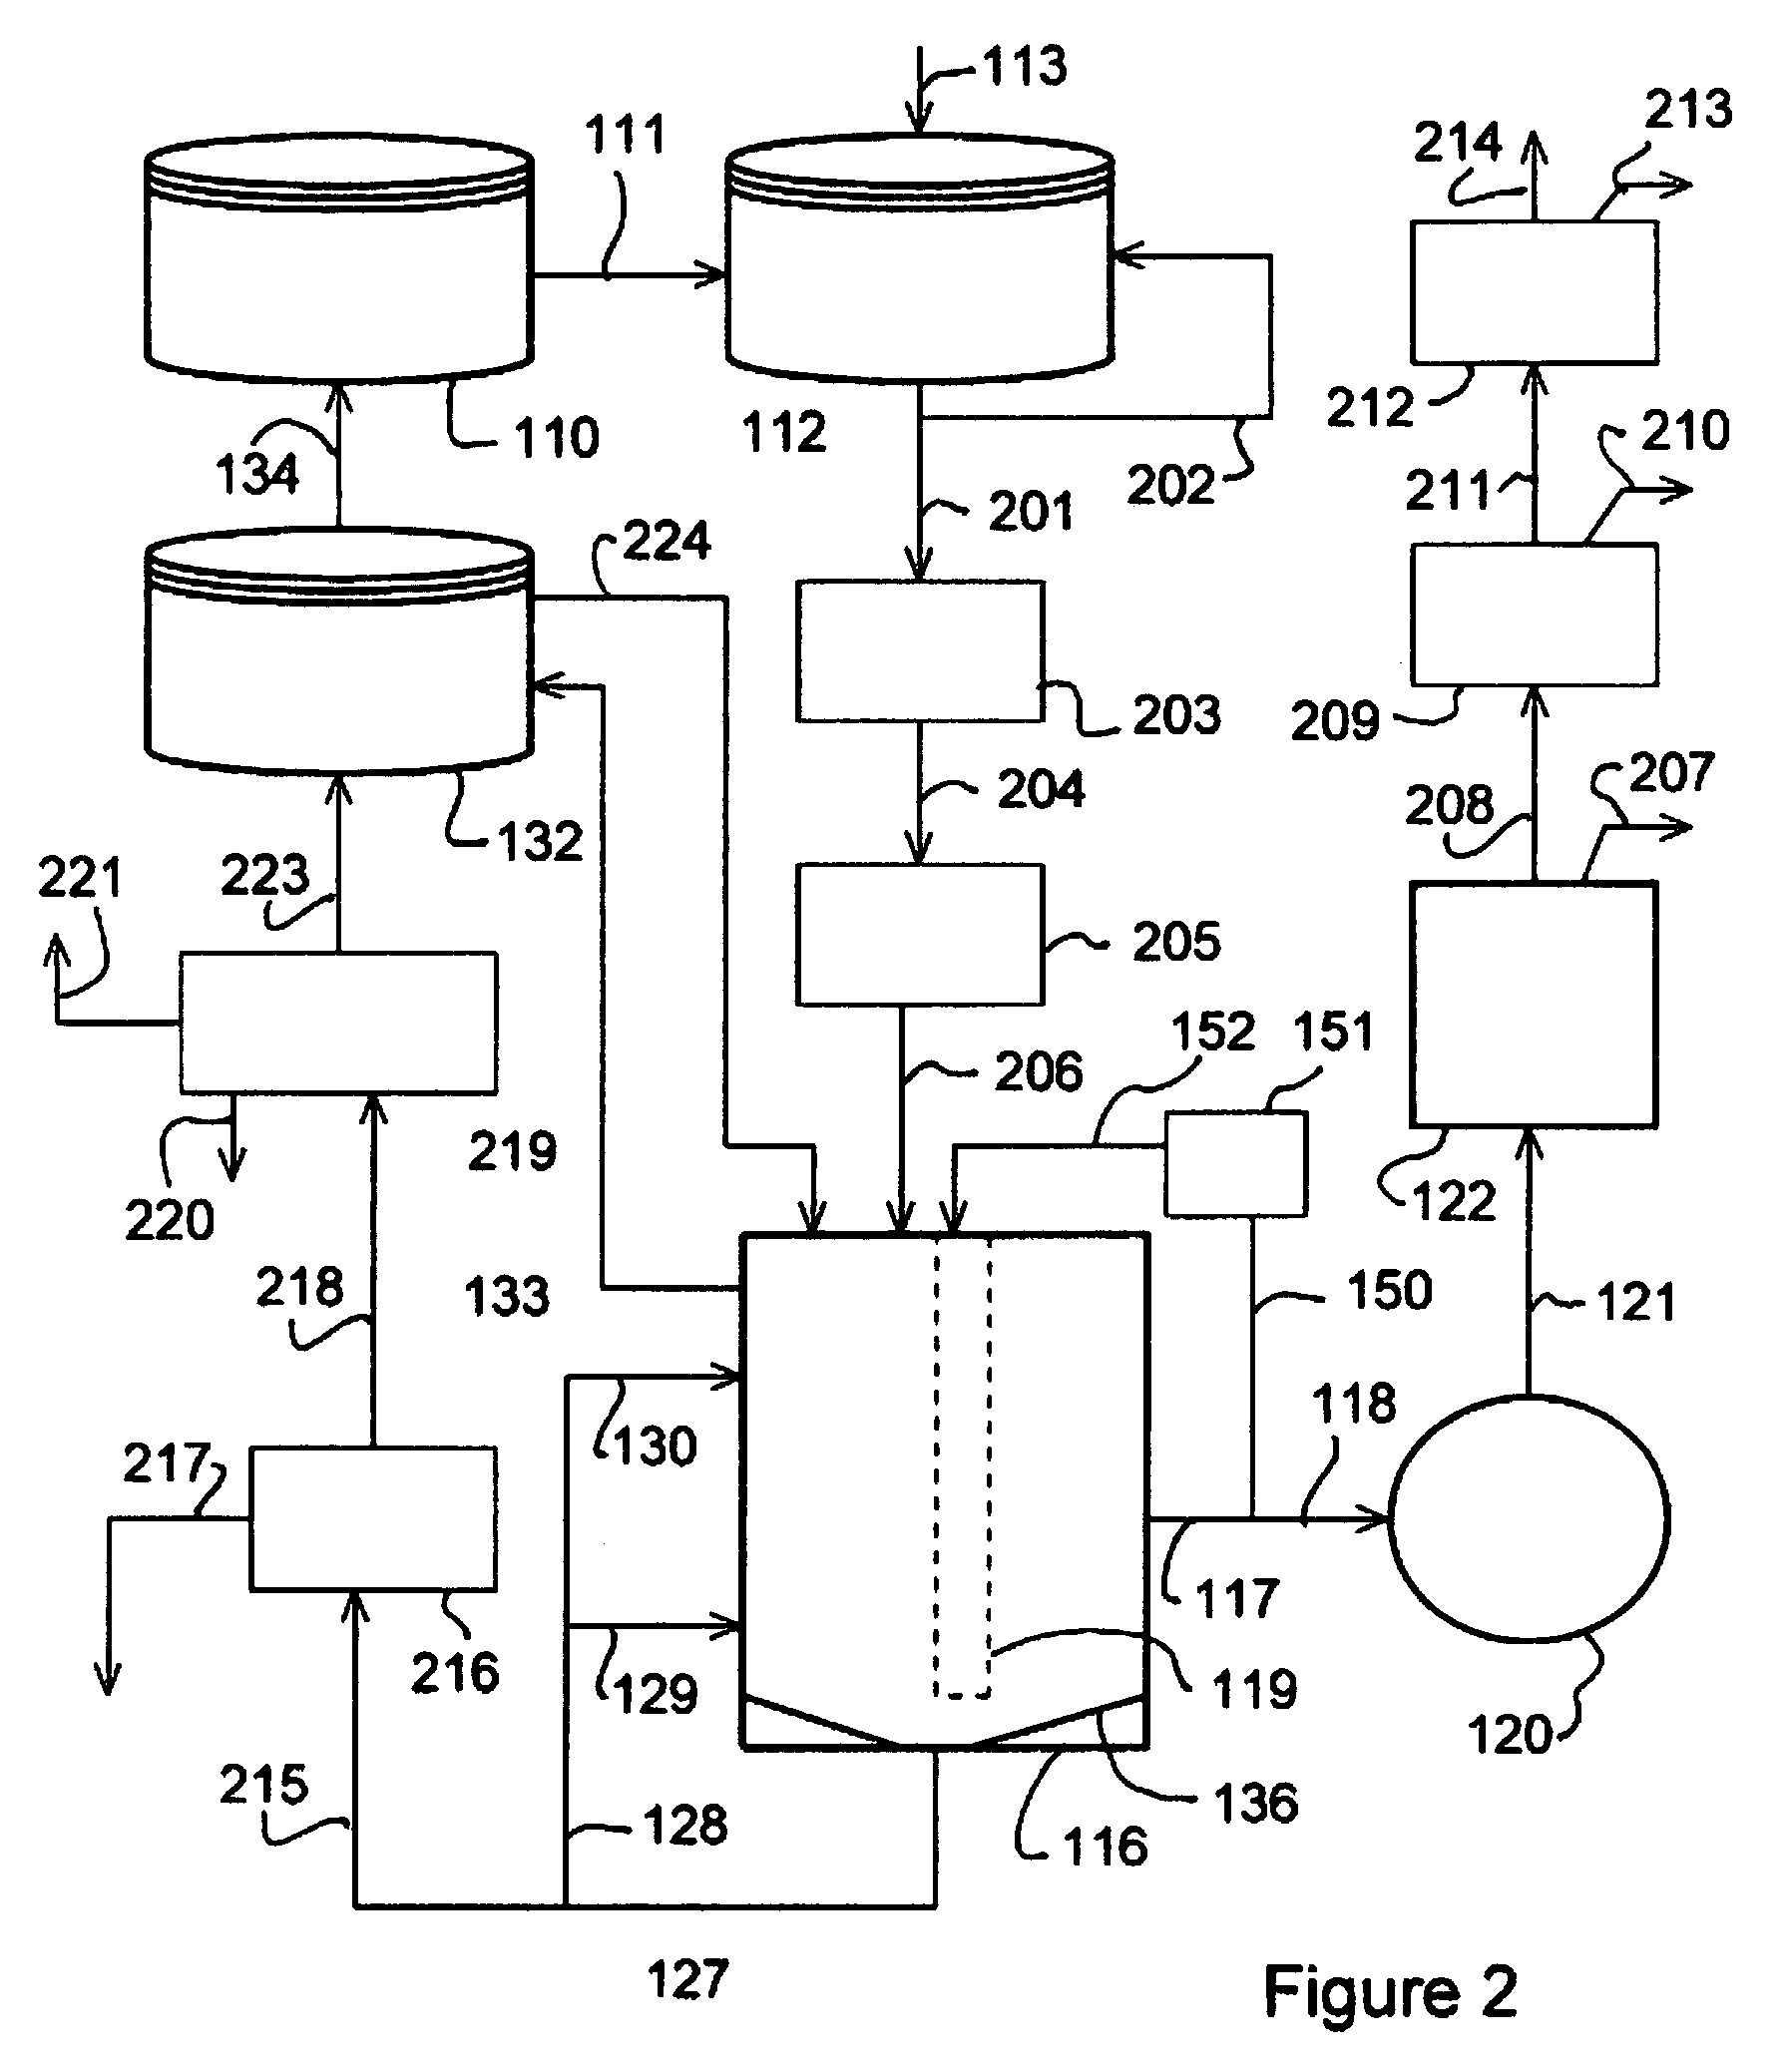 Method, composition and apparatus for high temperature production of methane from poultry waste